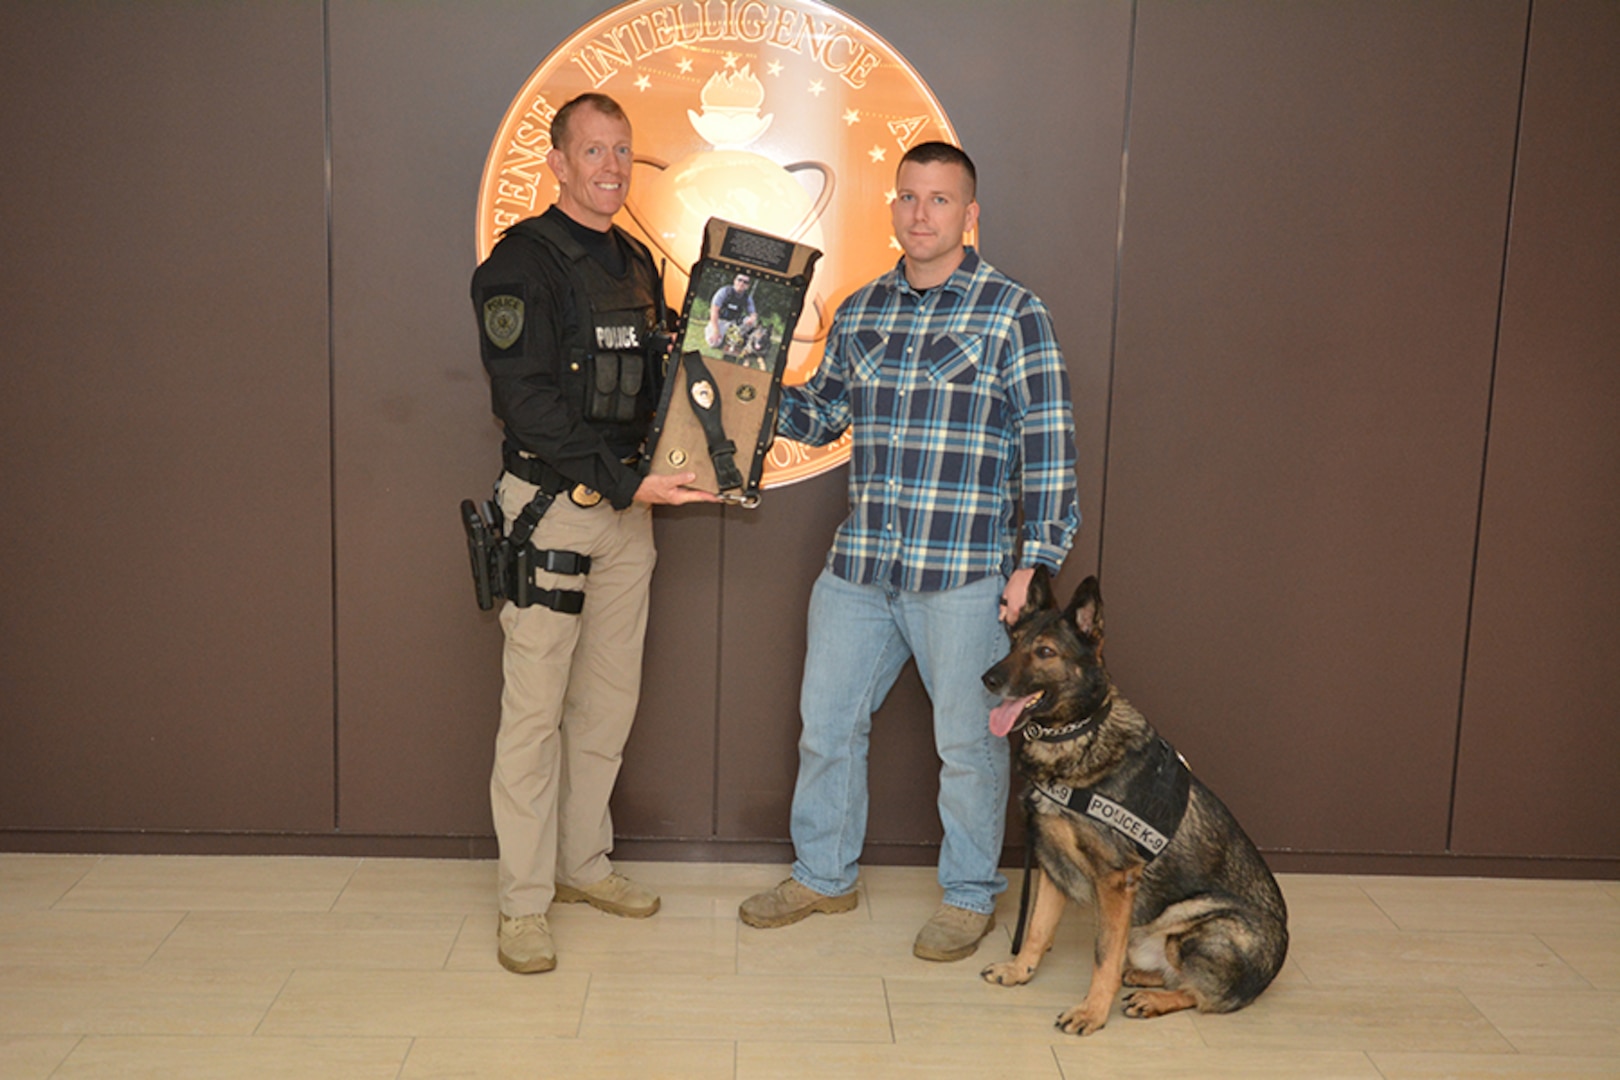 Capt. Bill McEnaney, Defense Intelligence Agency Police, presents a commemorative plaque to Scott Frazer for his years of service to the Agency.